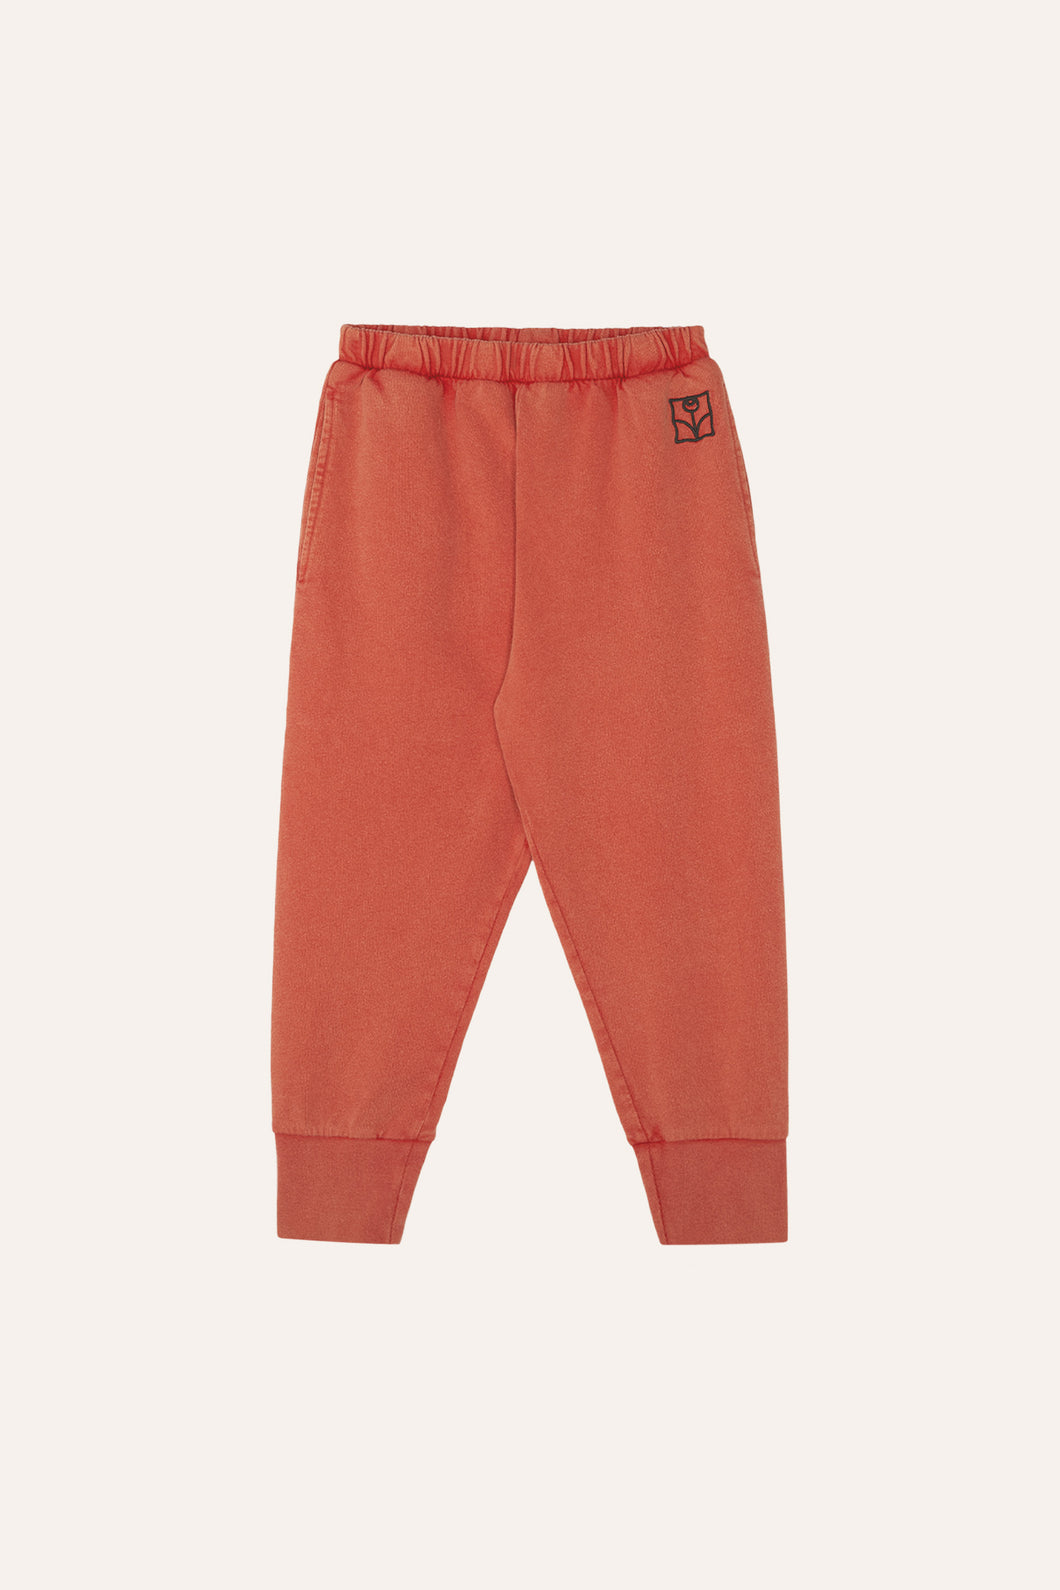 The Campamento / KID / Jogging Trousers / Red Washed